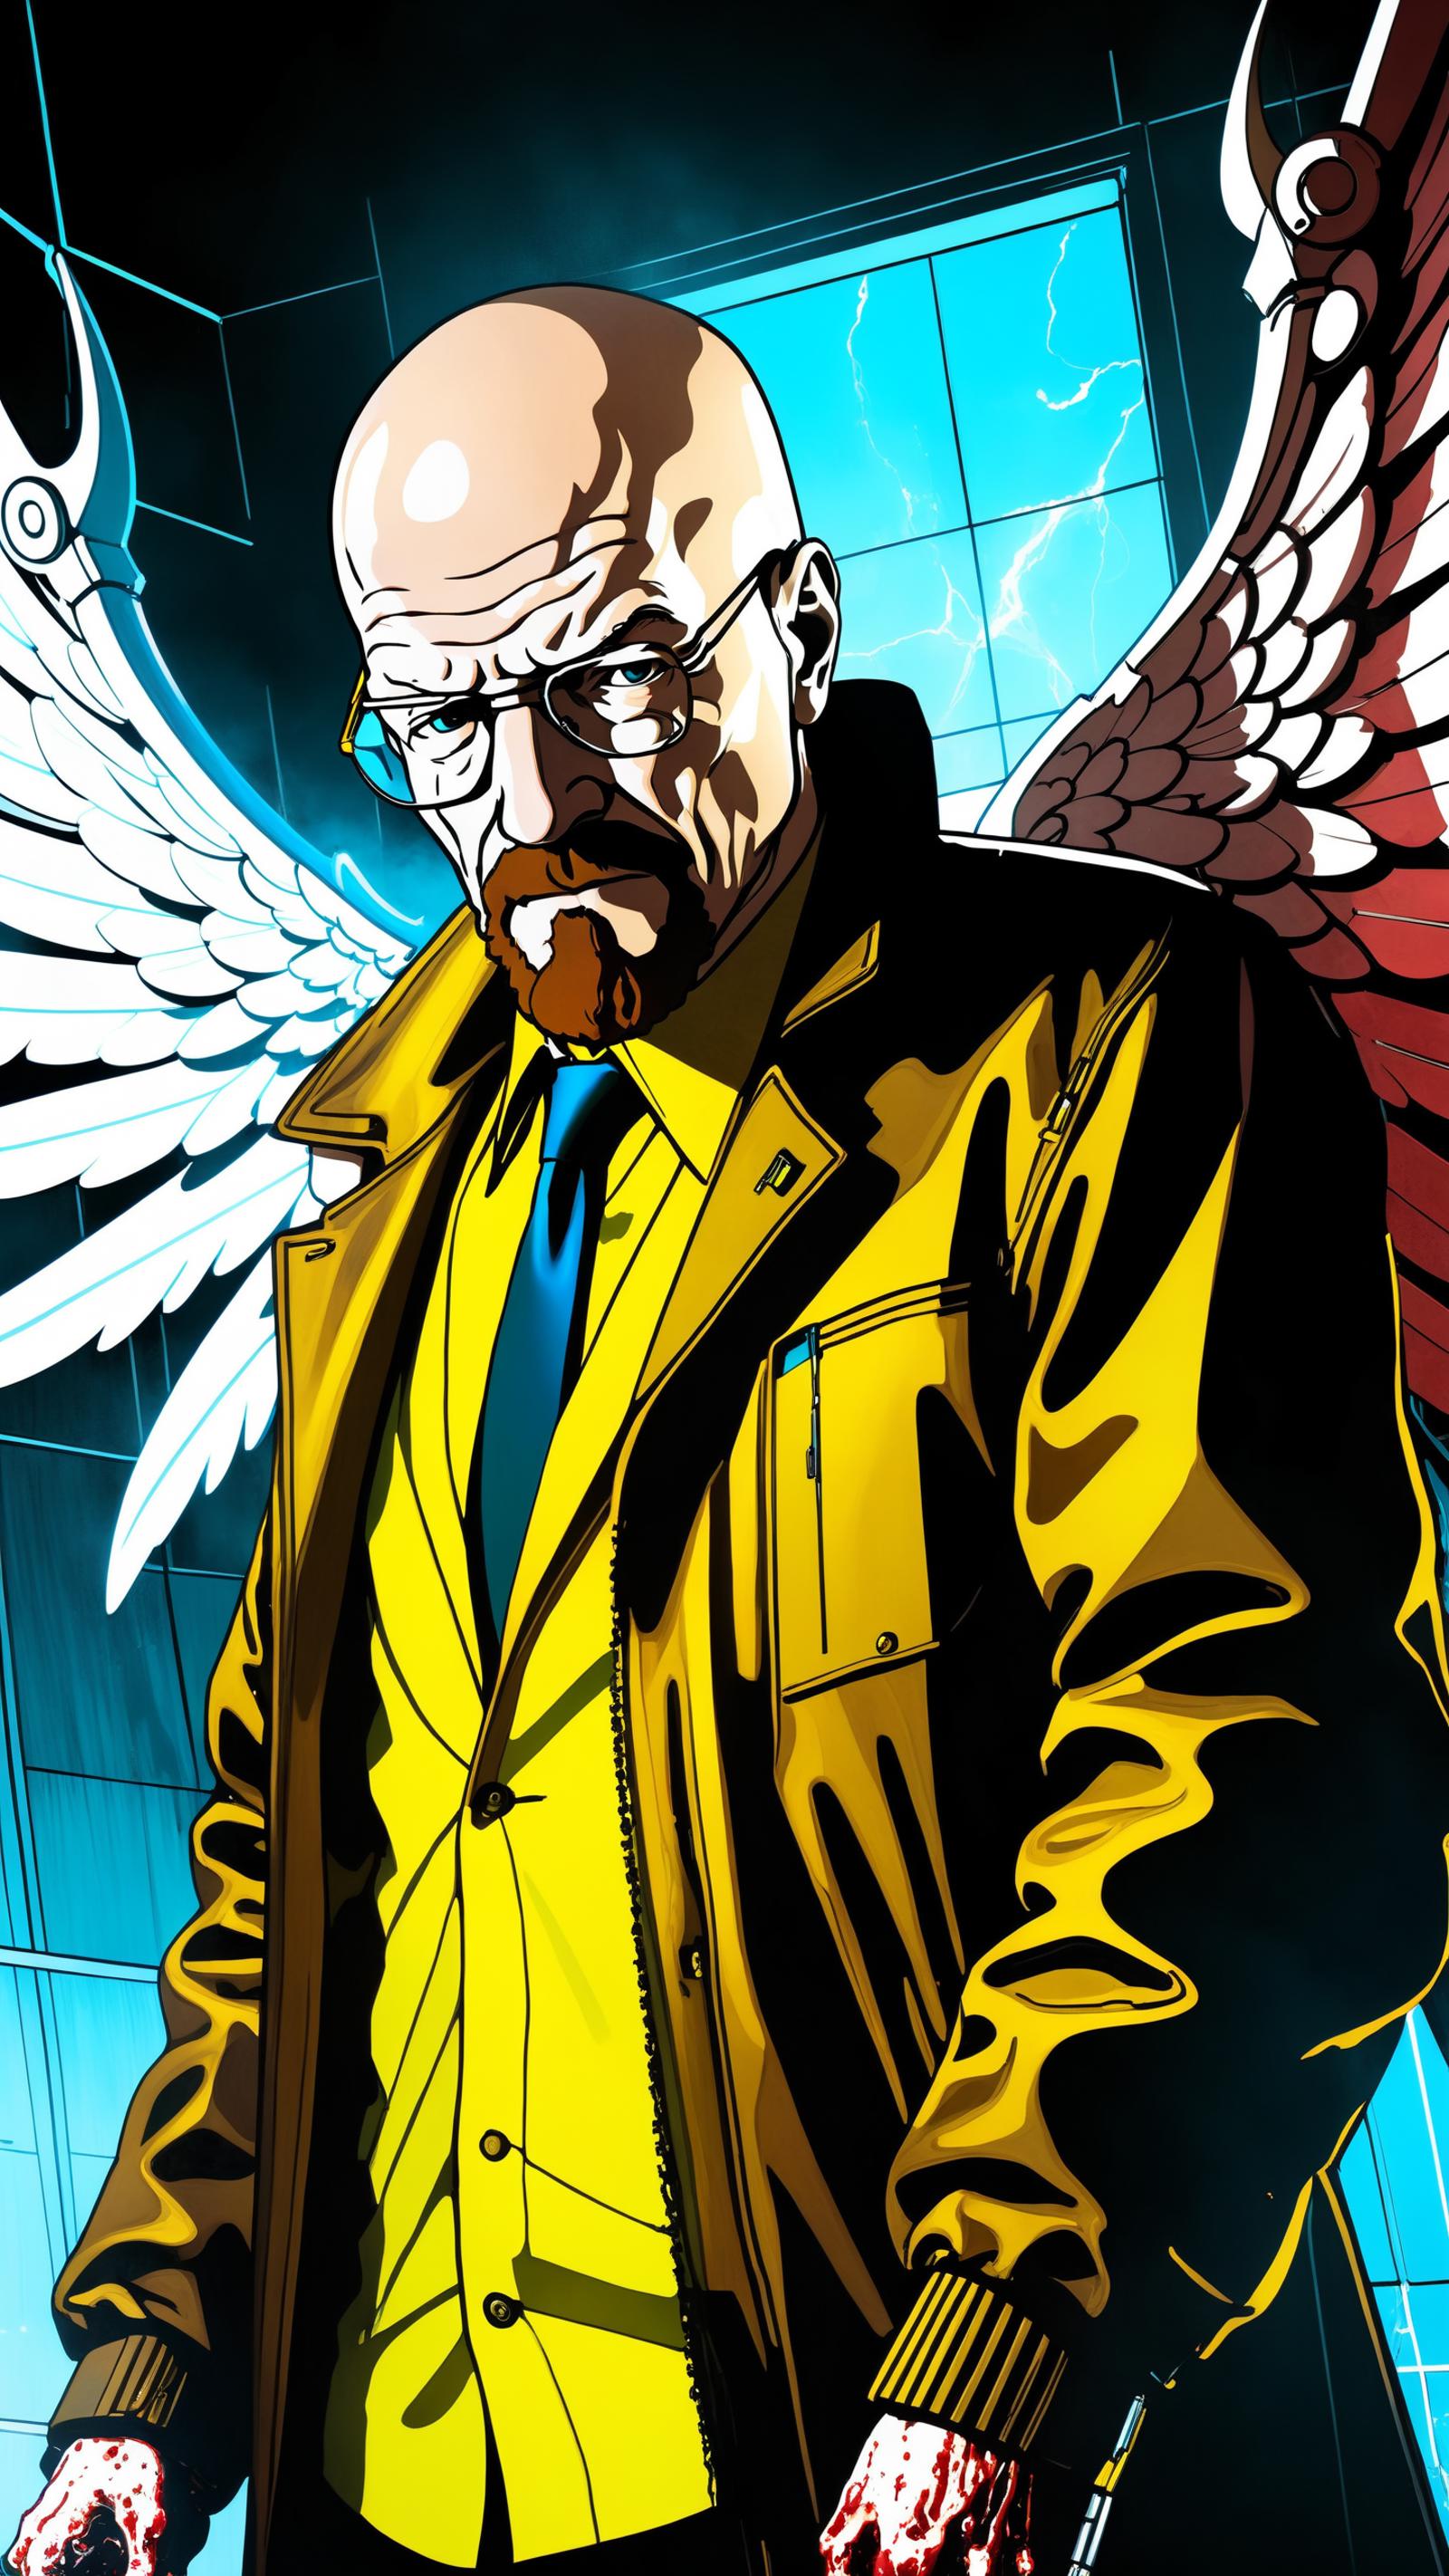 A cartoon drawing of a man wearing a yellow jacket and tie with wings and lightening bolts.